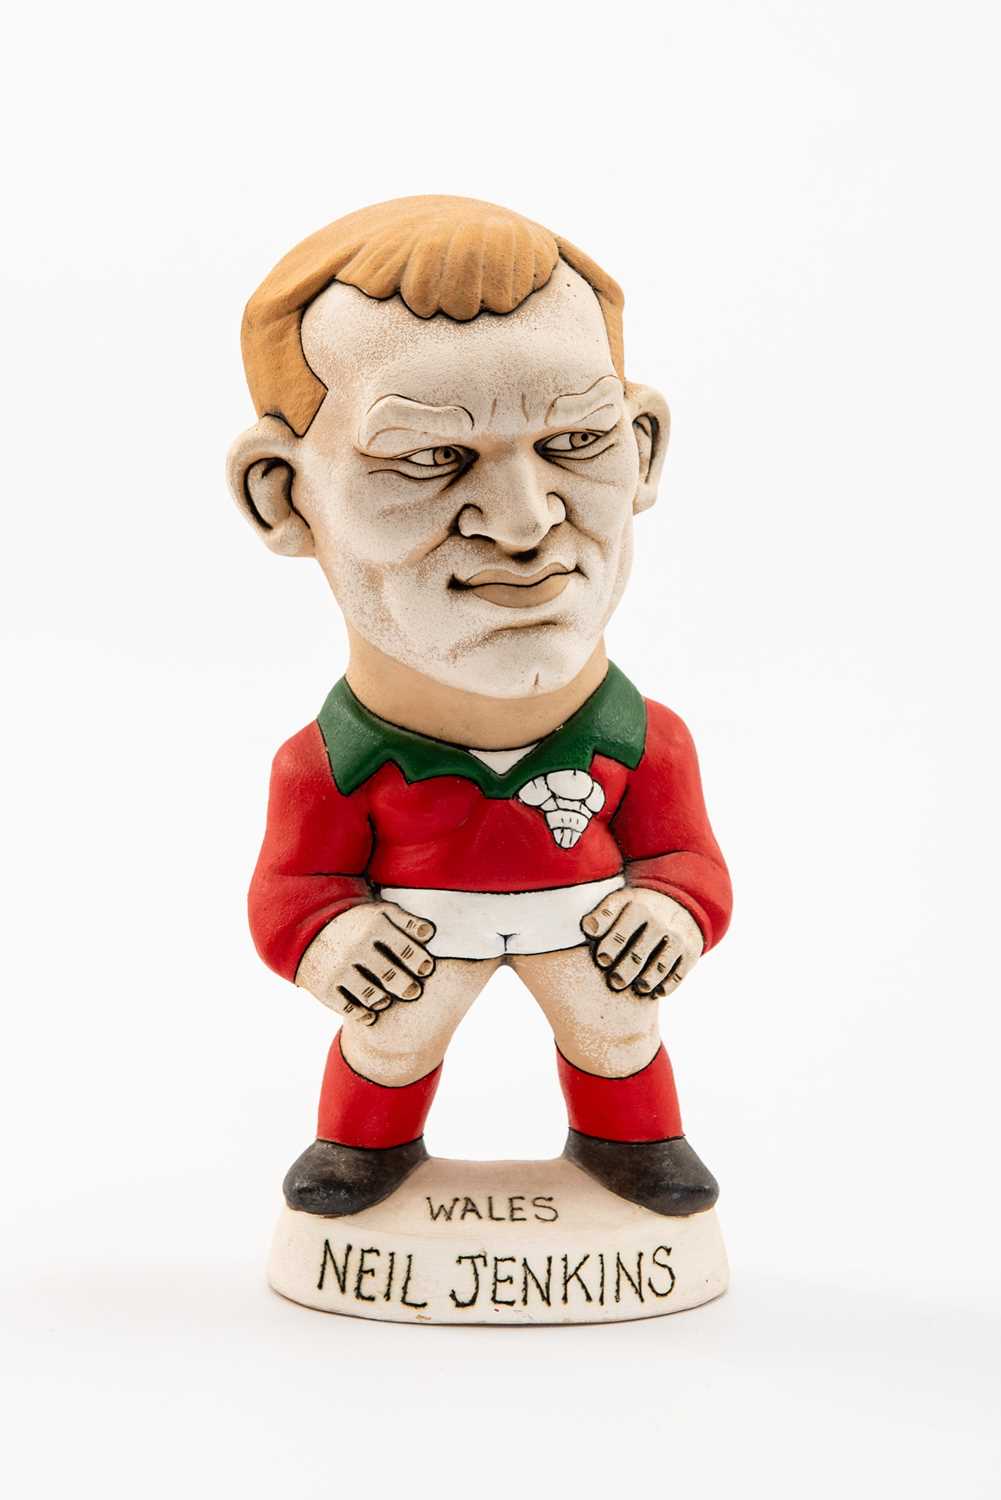 GROGG CARICATURE OF NEIL JENKINS (Grogg Shop Wales) standing on titled base, wearing his Wales No.10